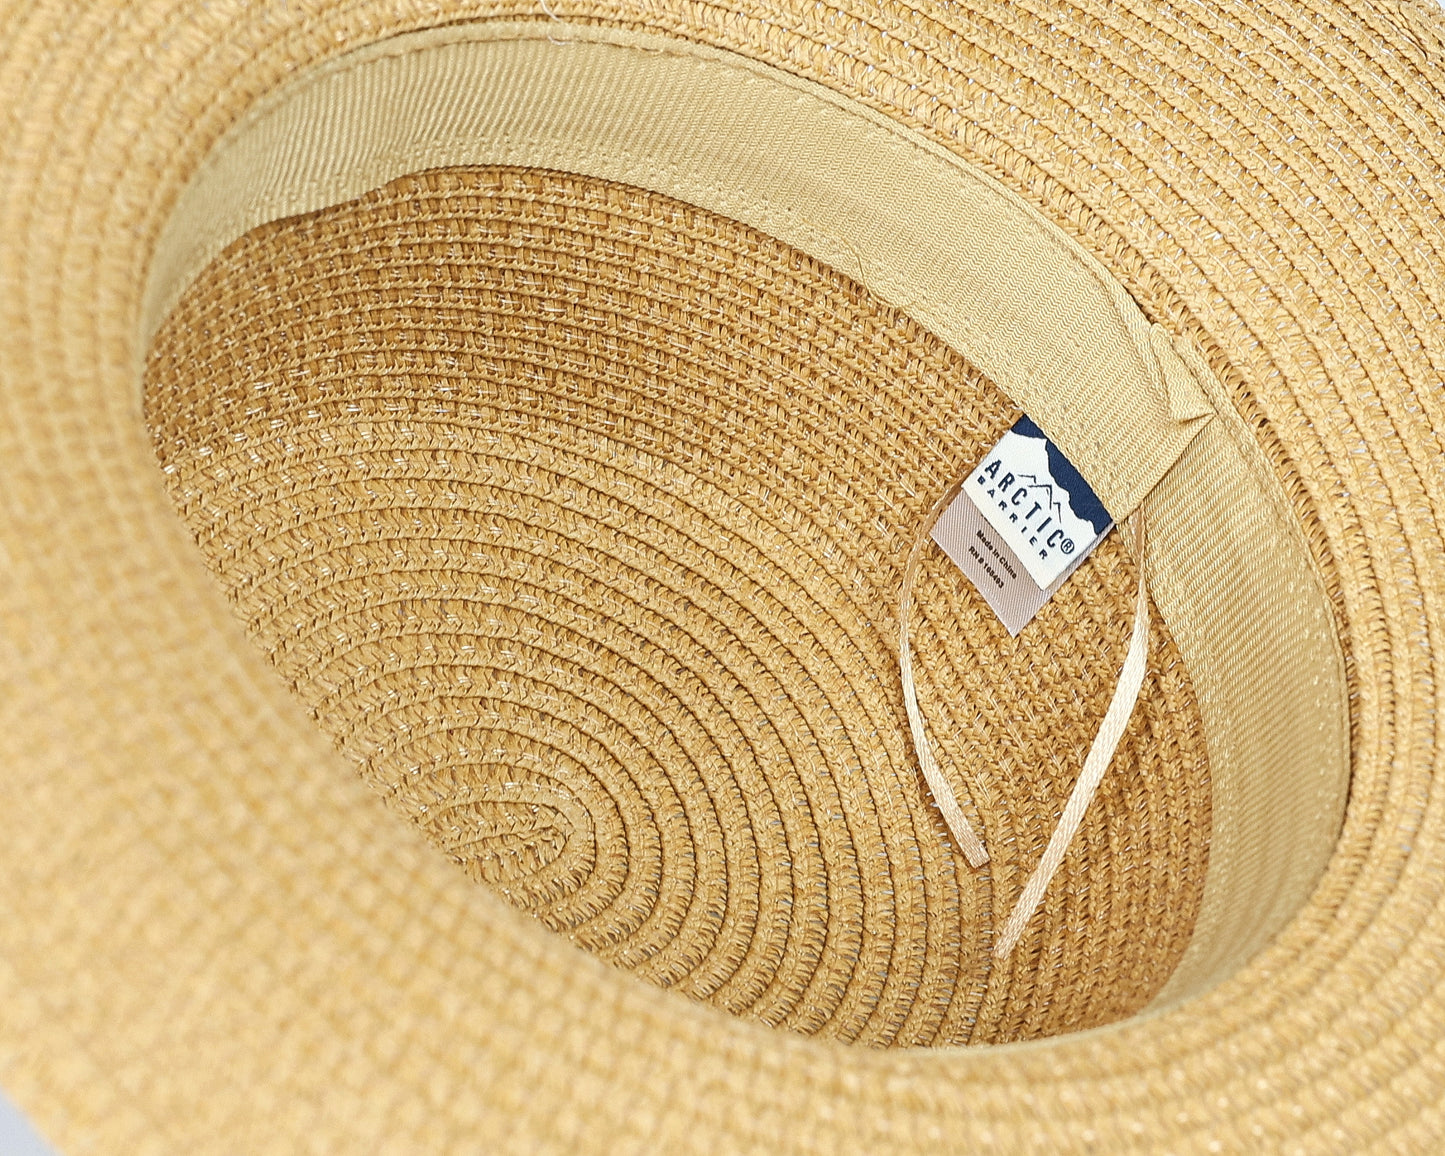 Faux Leather Band Straw Hat